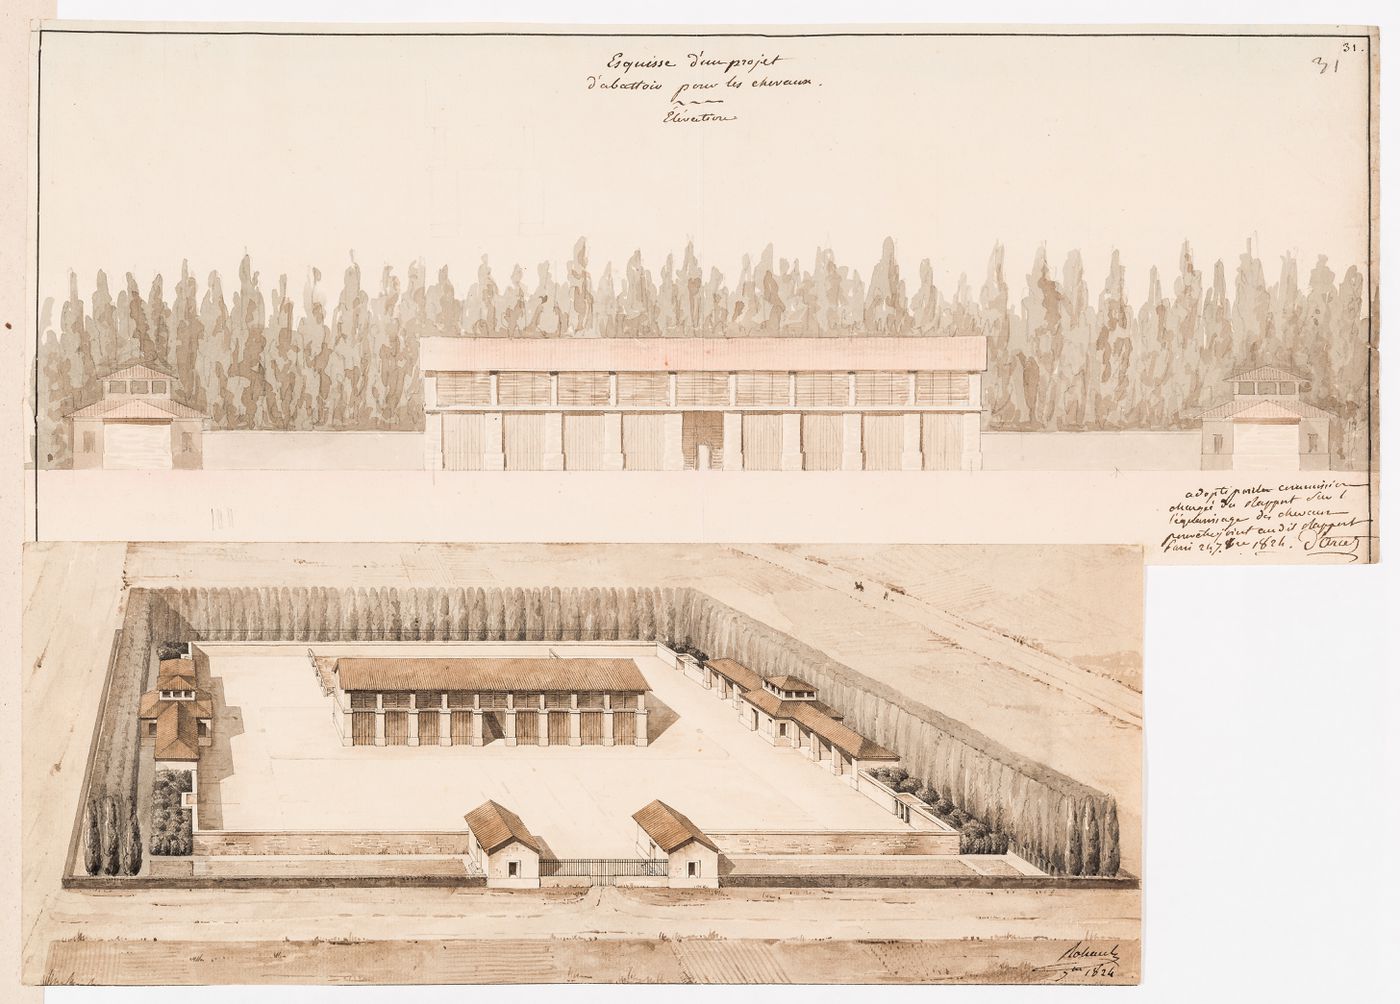 Project for a horse slaughterhouse, Plaine de Grenelle: Elevation for the central building